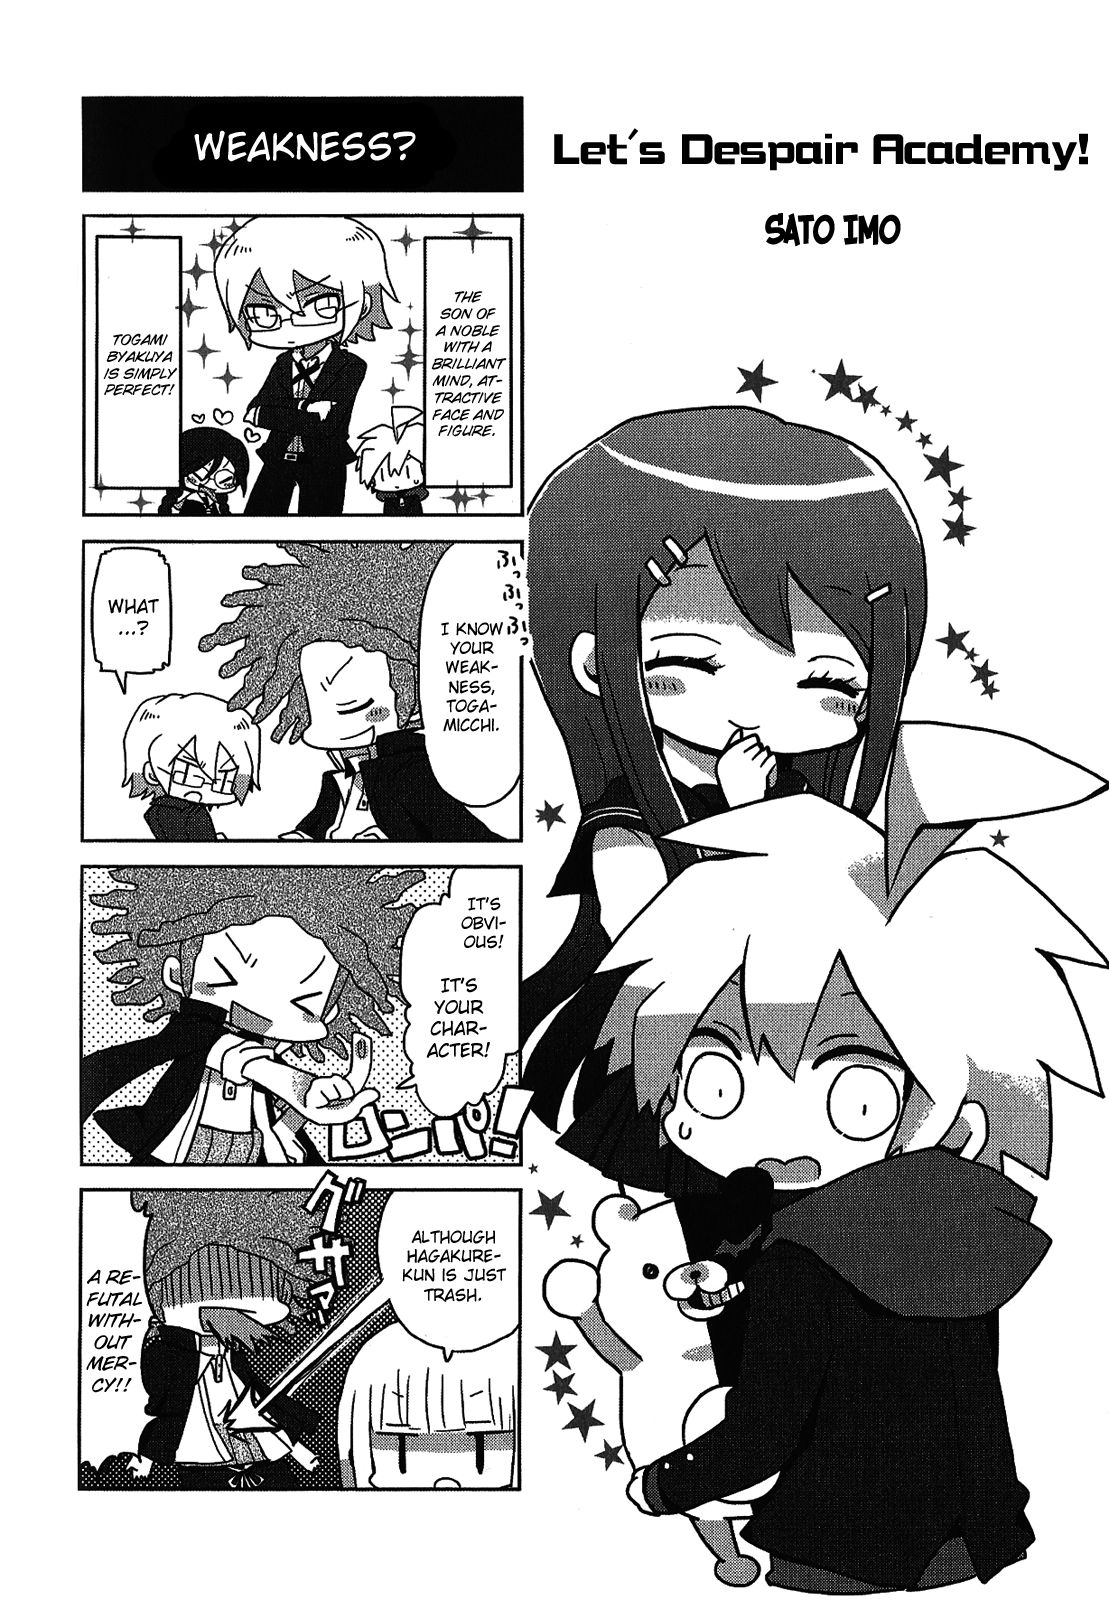 Danganronpa - The Academy of Hope and the High School Students of Despair 4-koma Kings - chapter 11 - #1